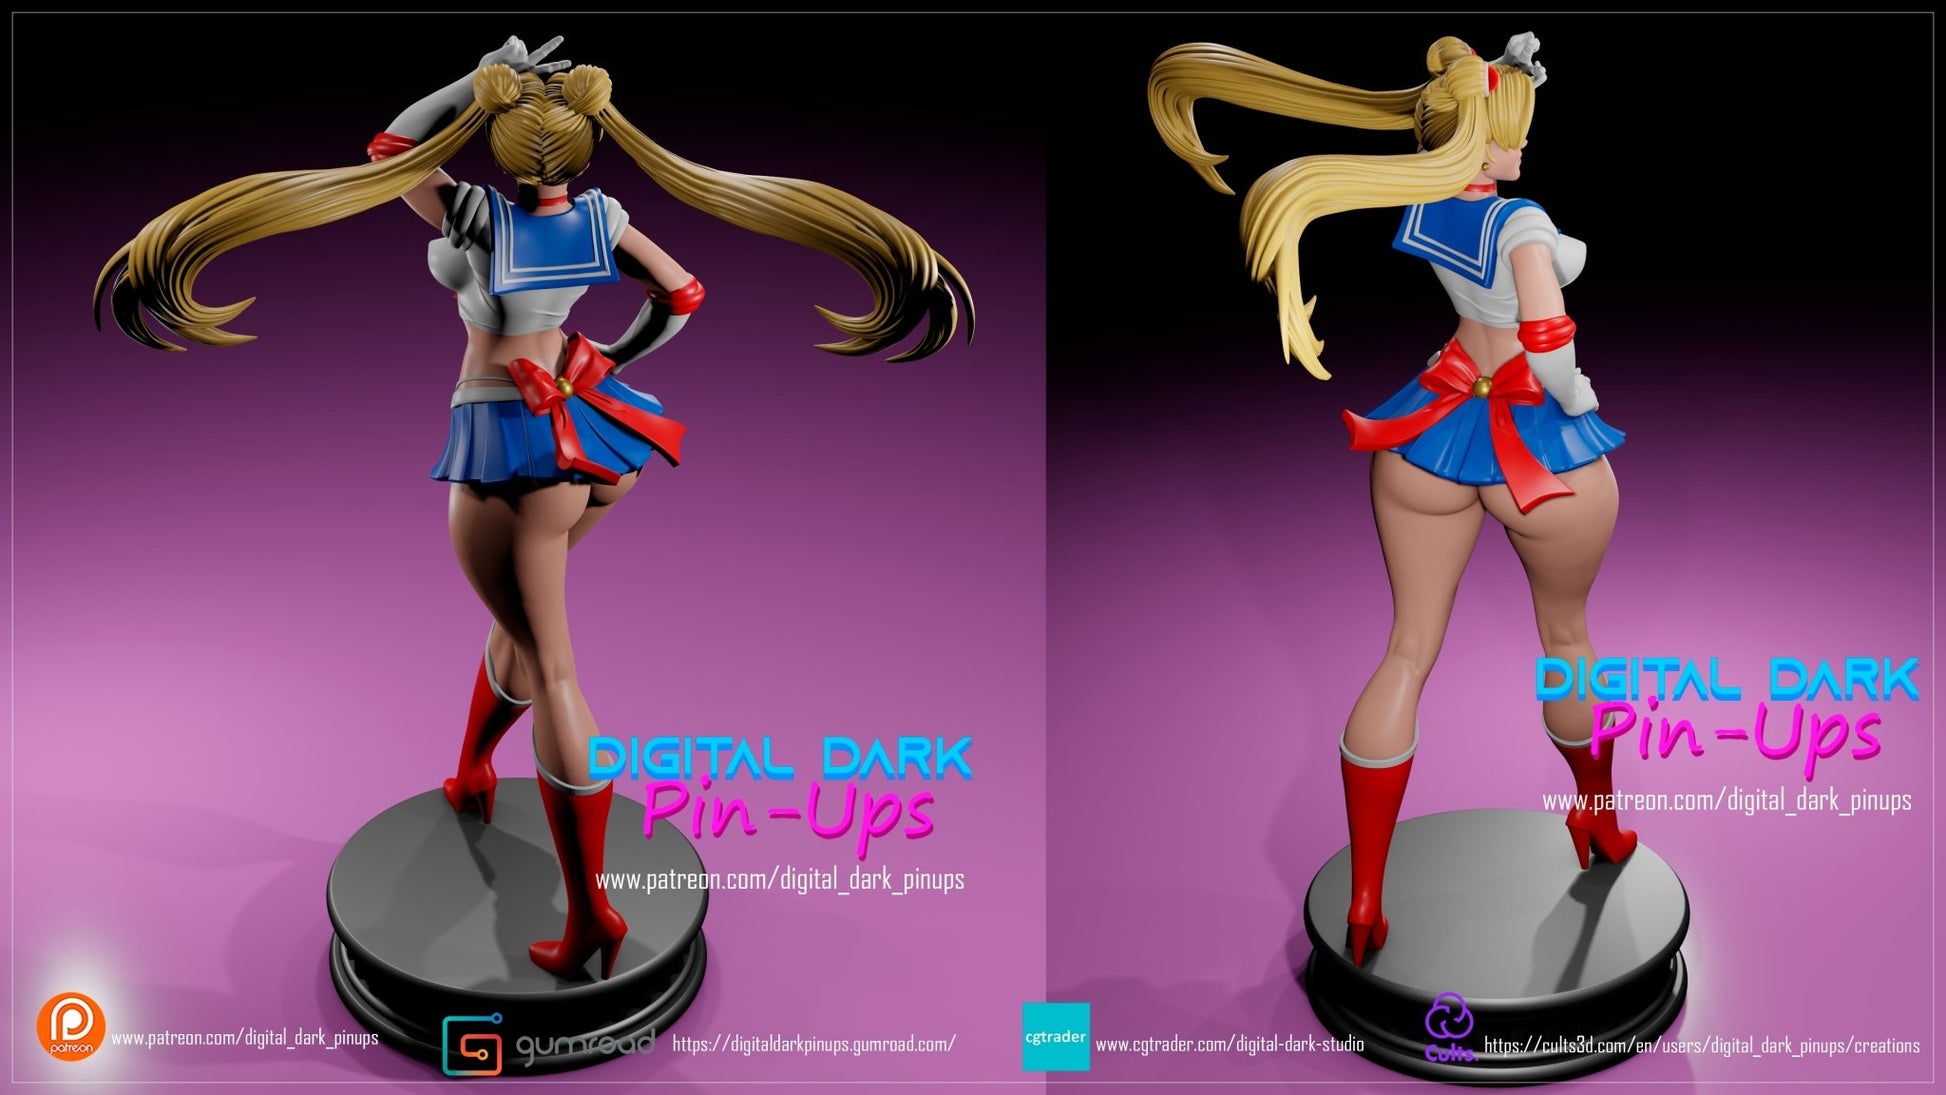 Sailor Moon 3D Printed Miniature FunArt by Digital Dark Pin-Ups Scaled Collectables Statues & Figurines